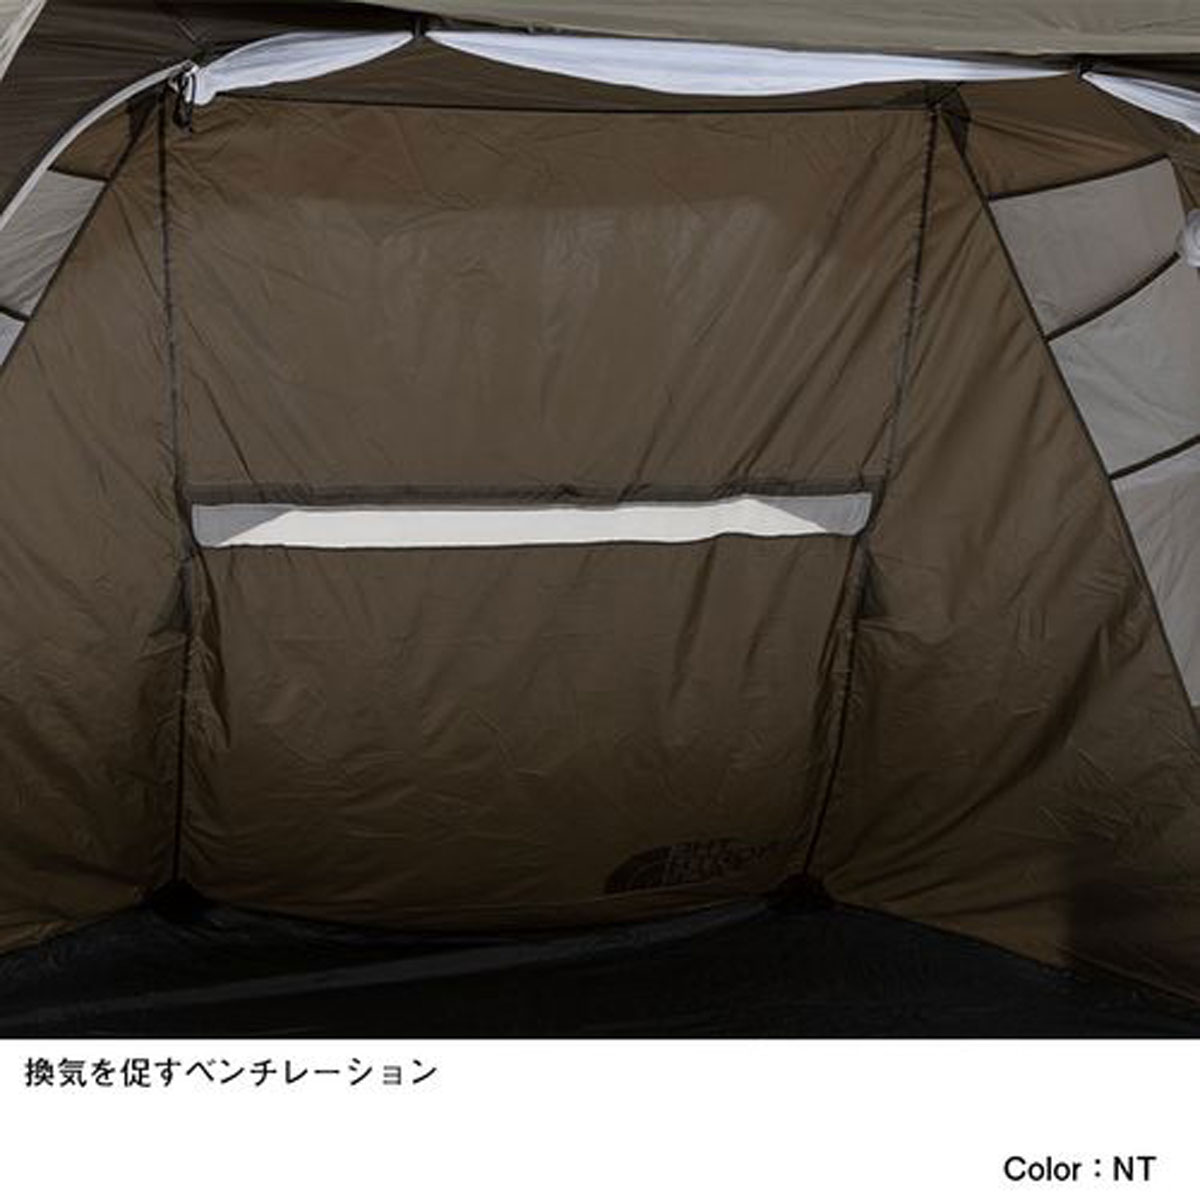 HOMESTEAD SHELTER （ホームステッドシェルター）THE NORTH FACE（ザ